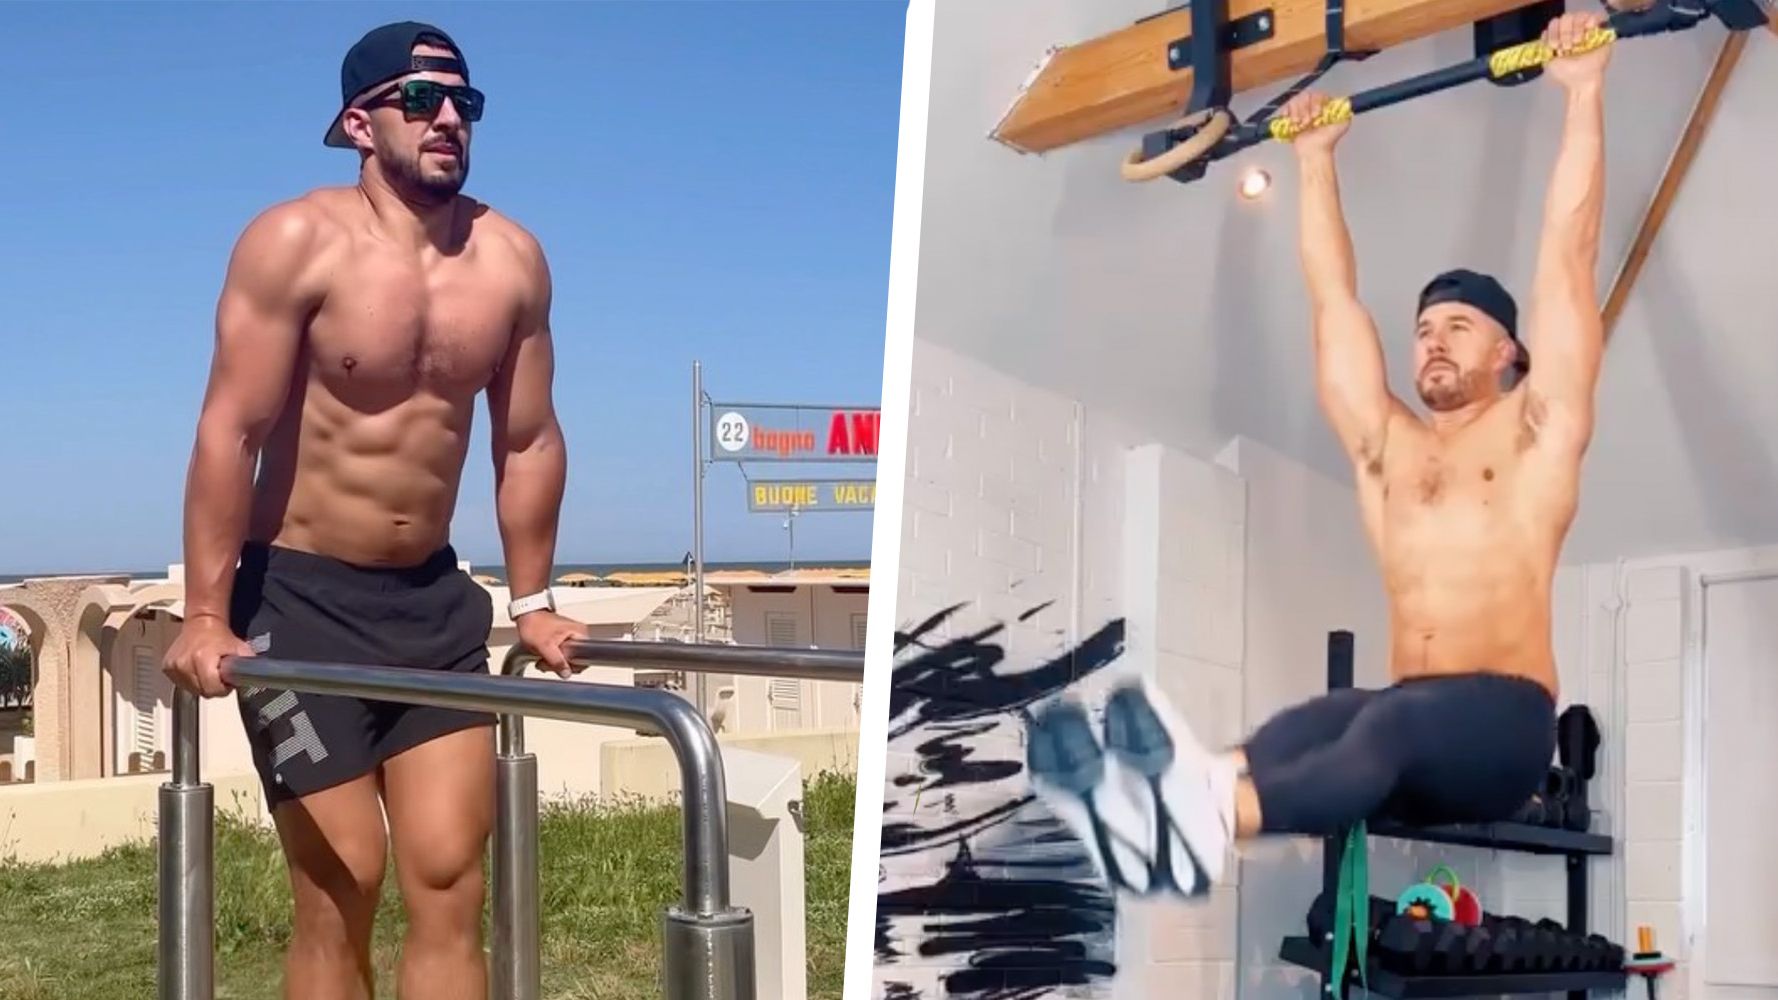 This Calisthenics Workout Builds Full-Body Functional Muscle